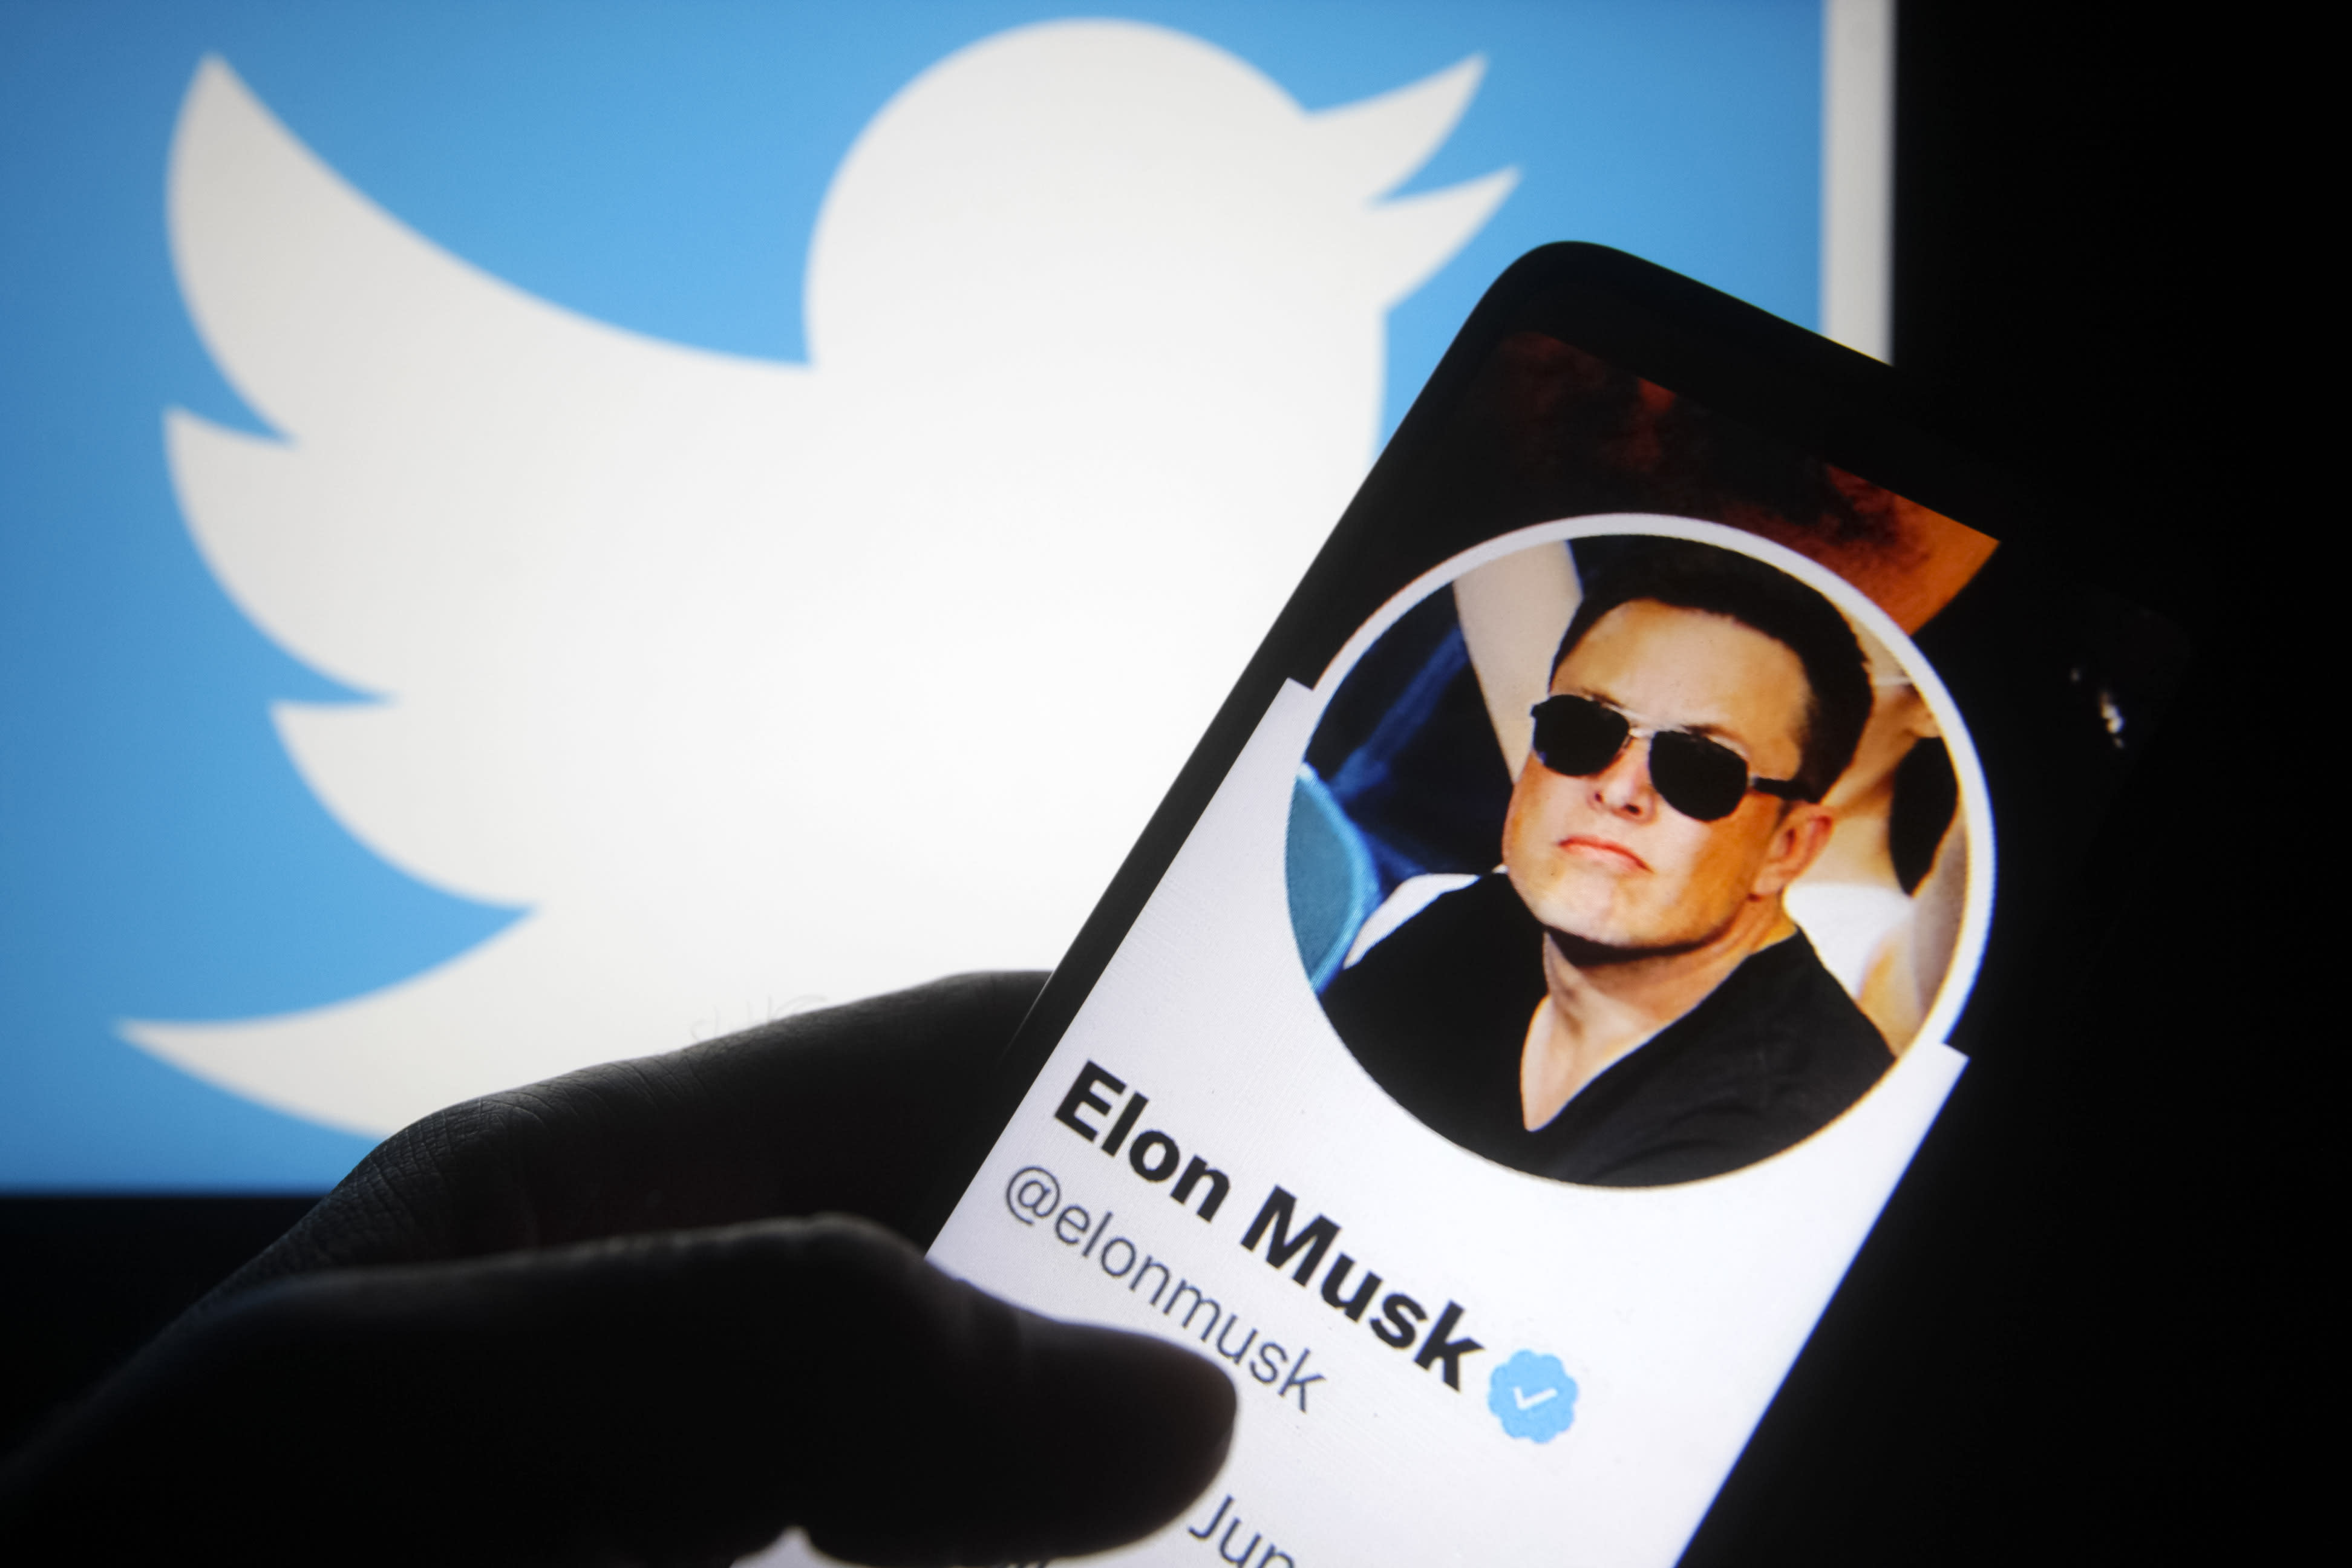 Celebrities Are Starting To Leave Twitter After Elon Musk Takeover